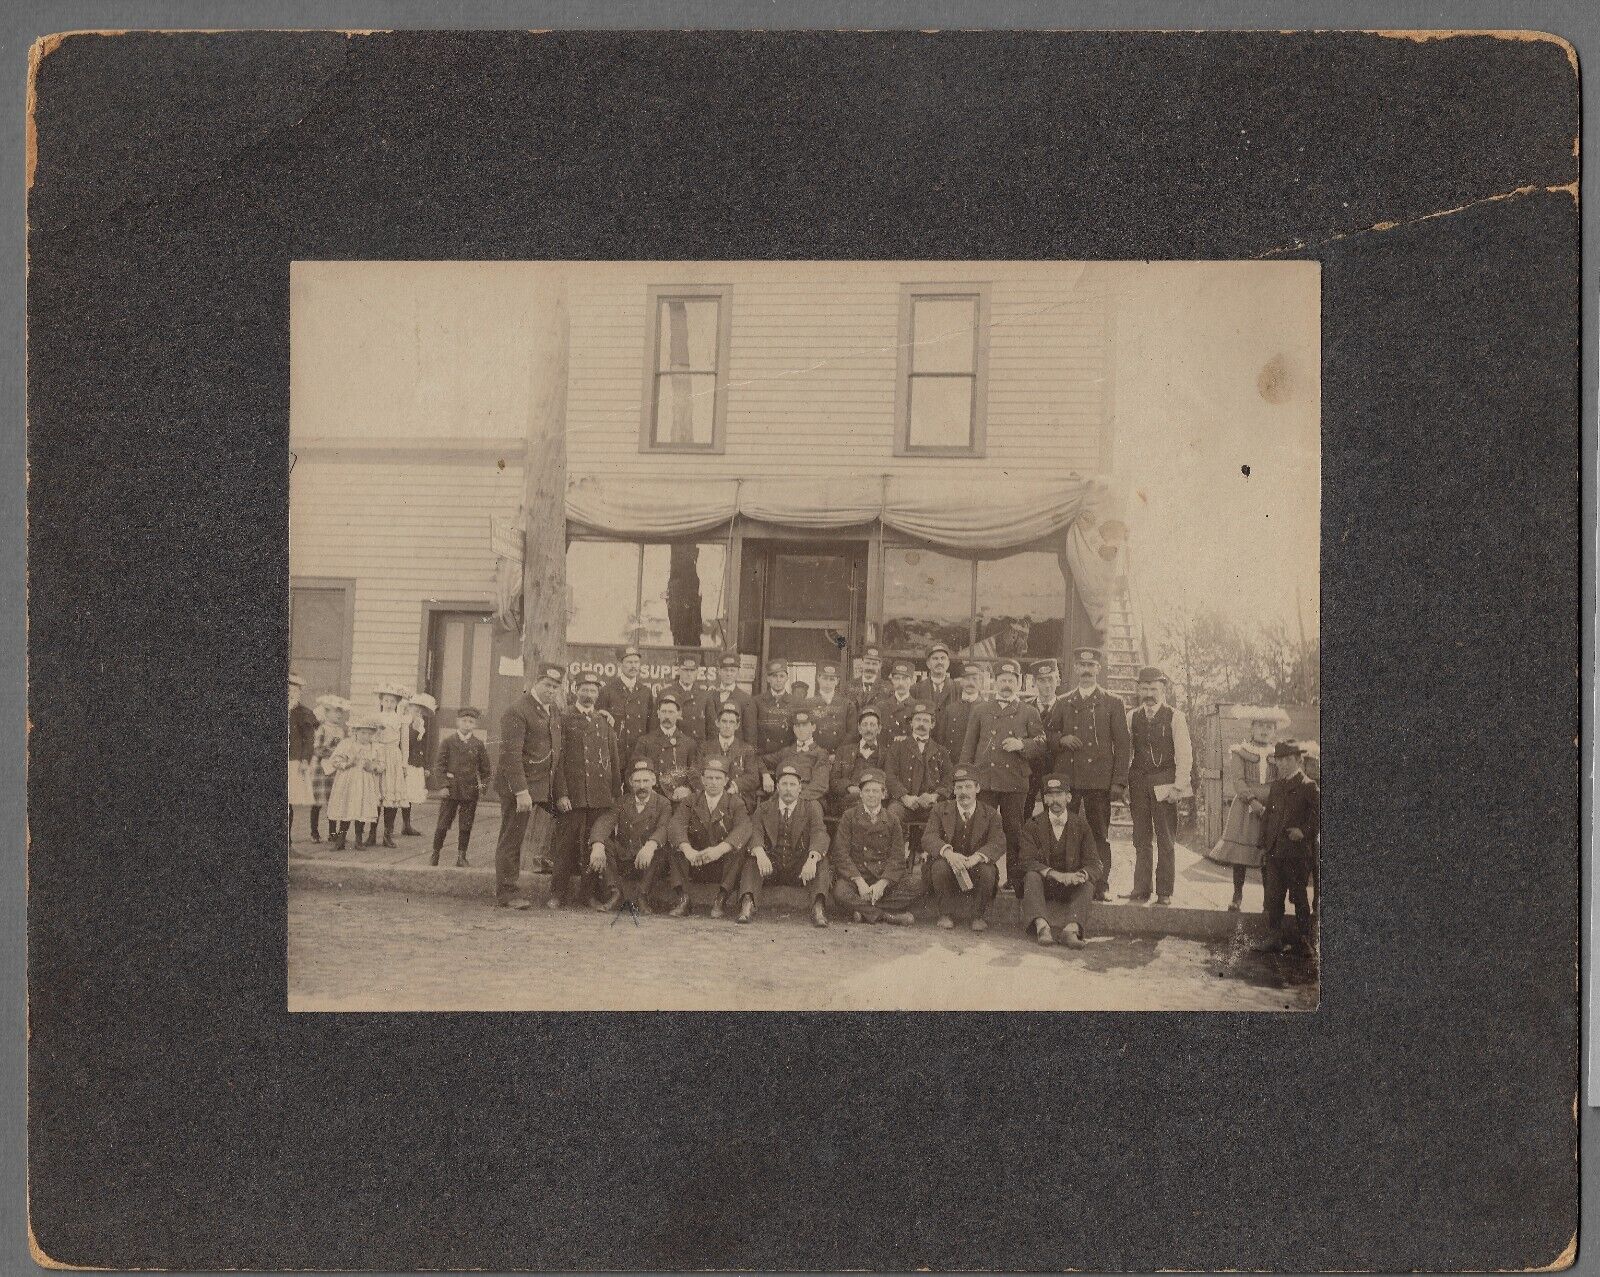 Fireman Group Portrait Outdoor View Cabinet Card Photo Circa Early 1900s